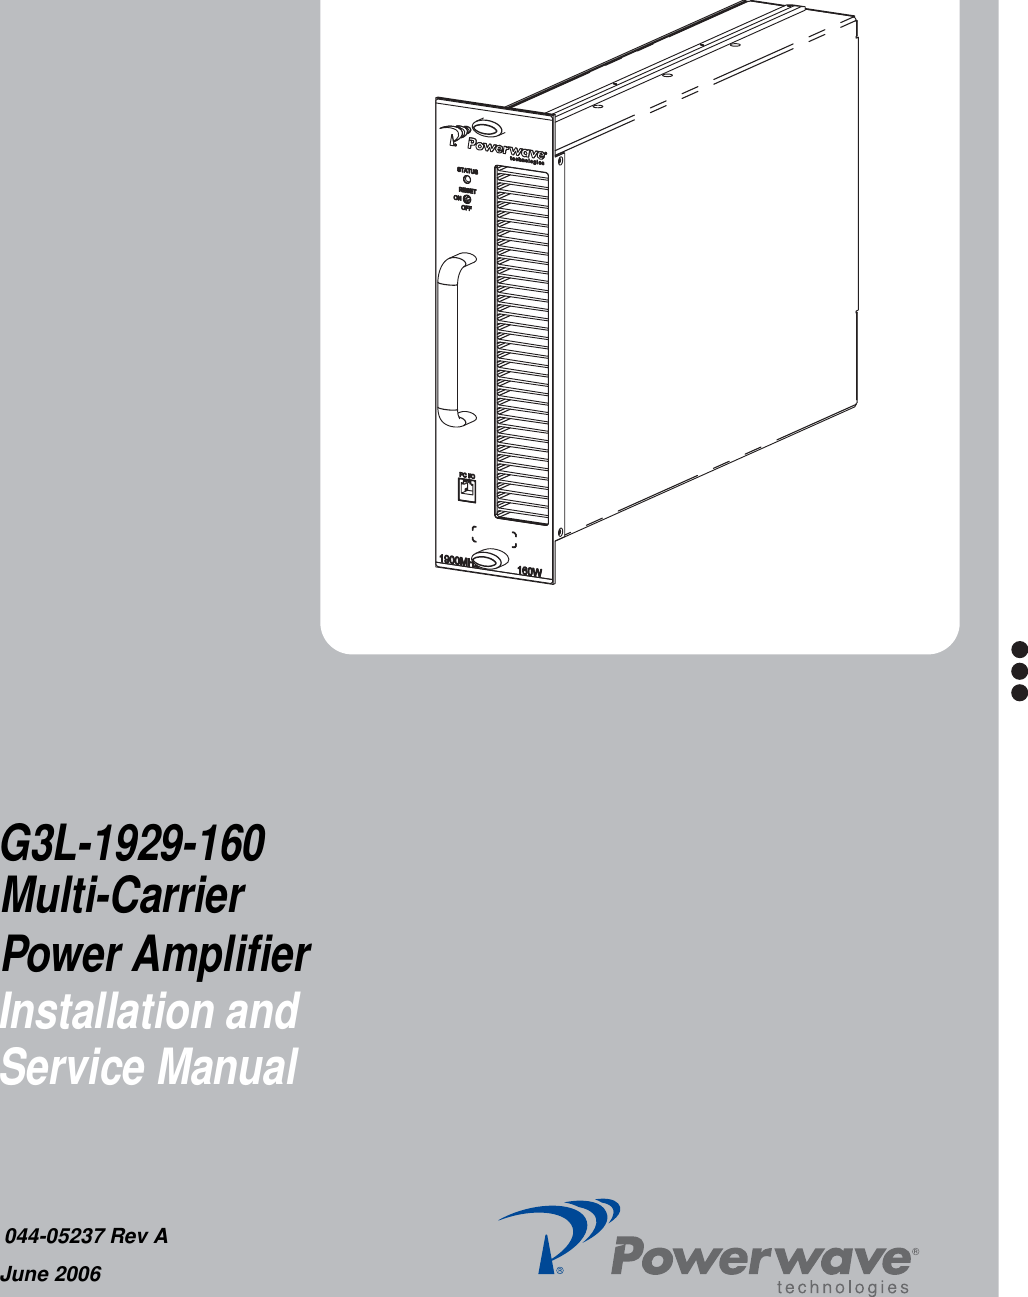 G3L-1929-160 Installation and Service Manual044-05237 Rev AJune 2006Multi-CarrierPower Amplifier